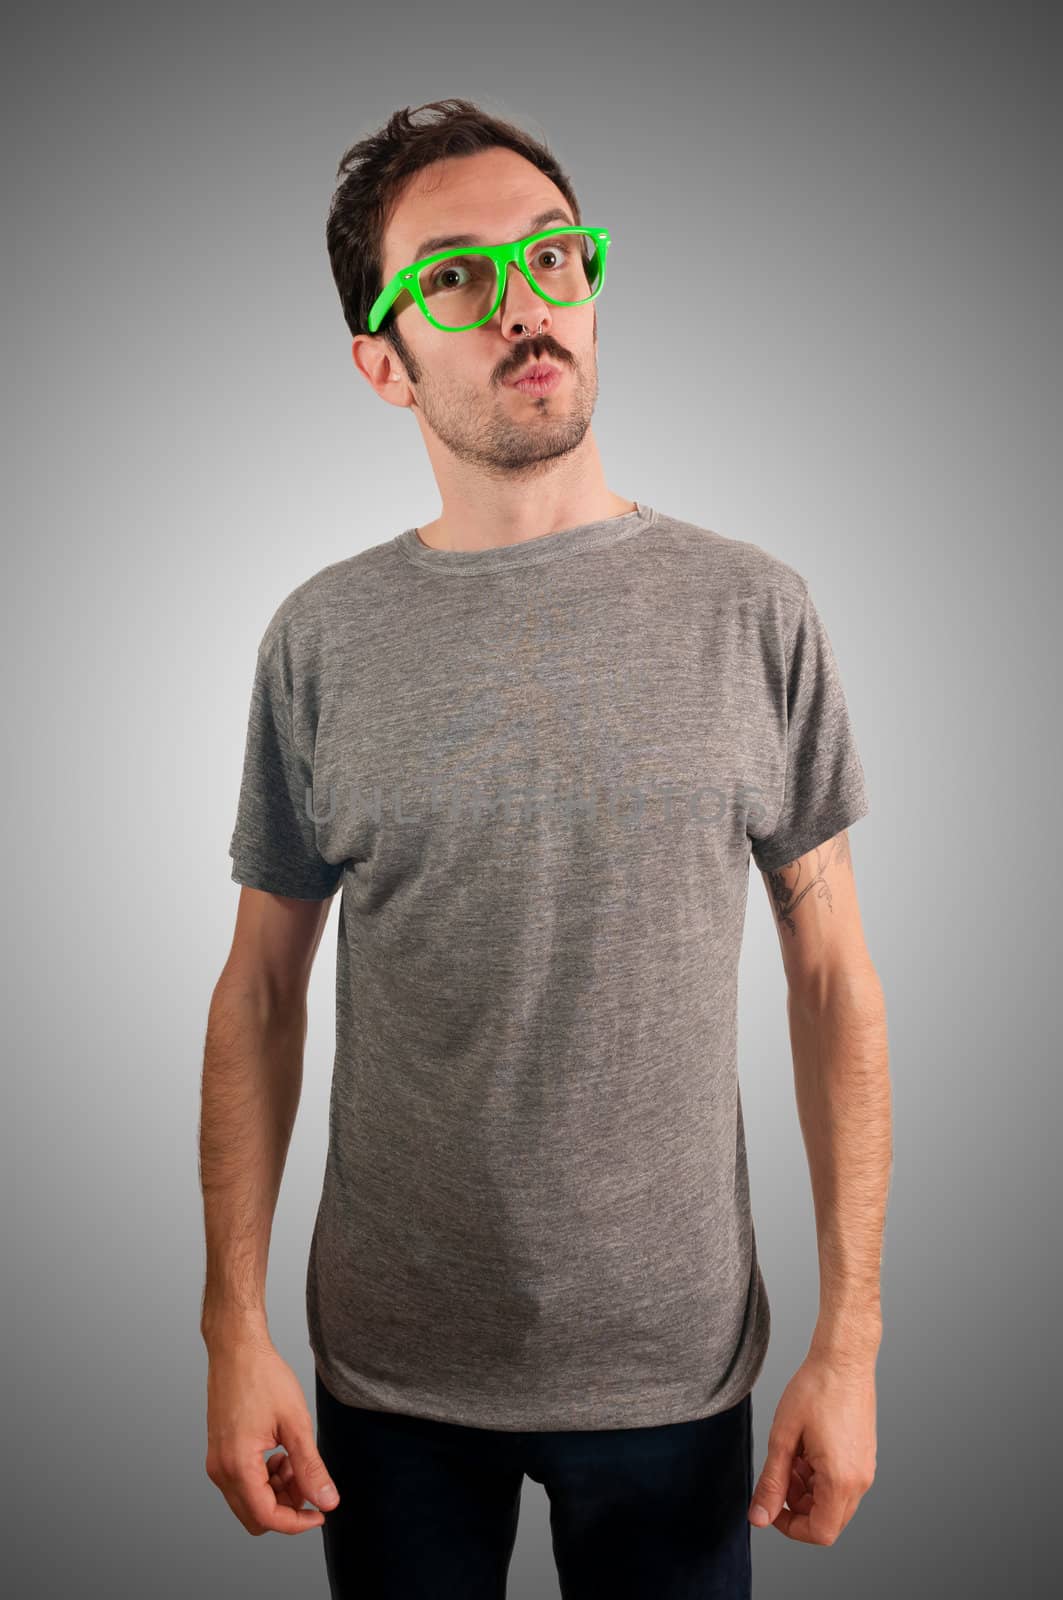 guy with green eyeglasses and mustache by peus